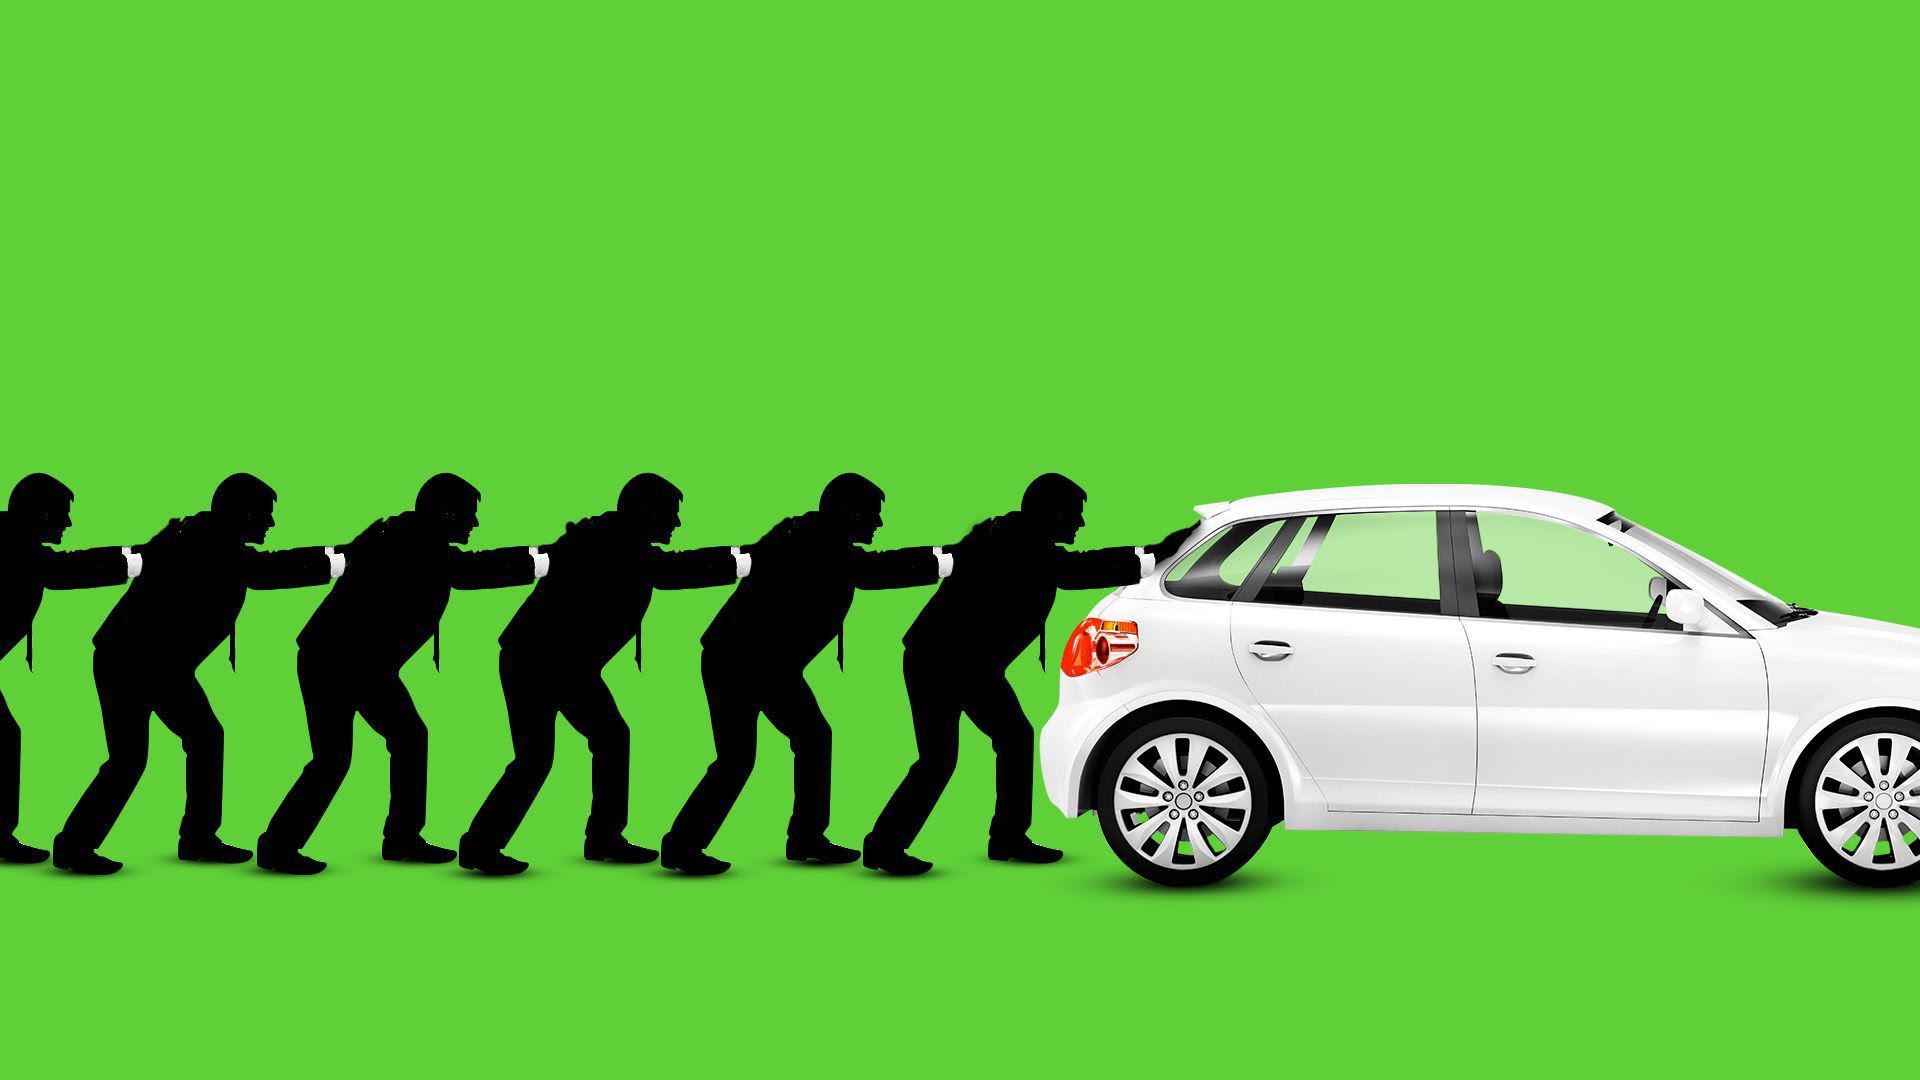 Illustration of people pushing an electric car